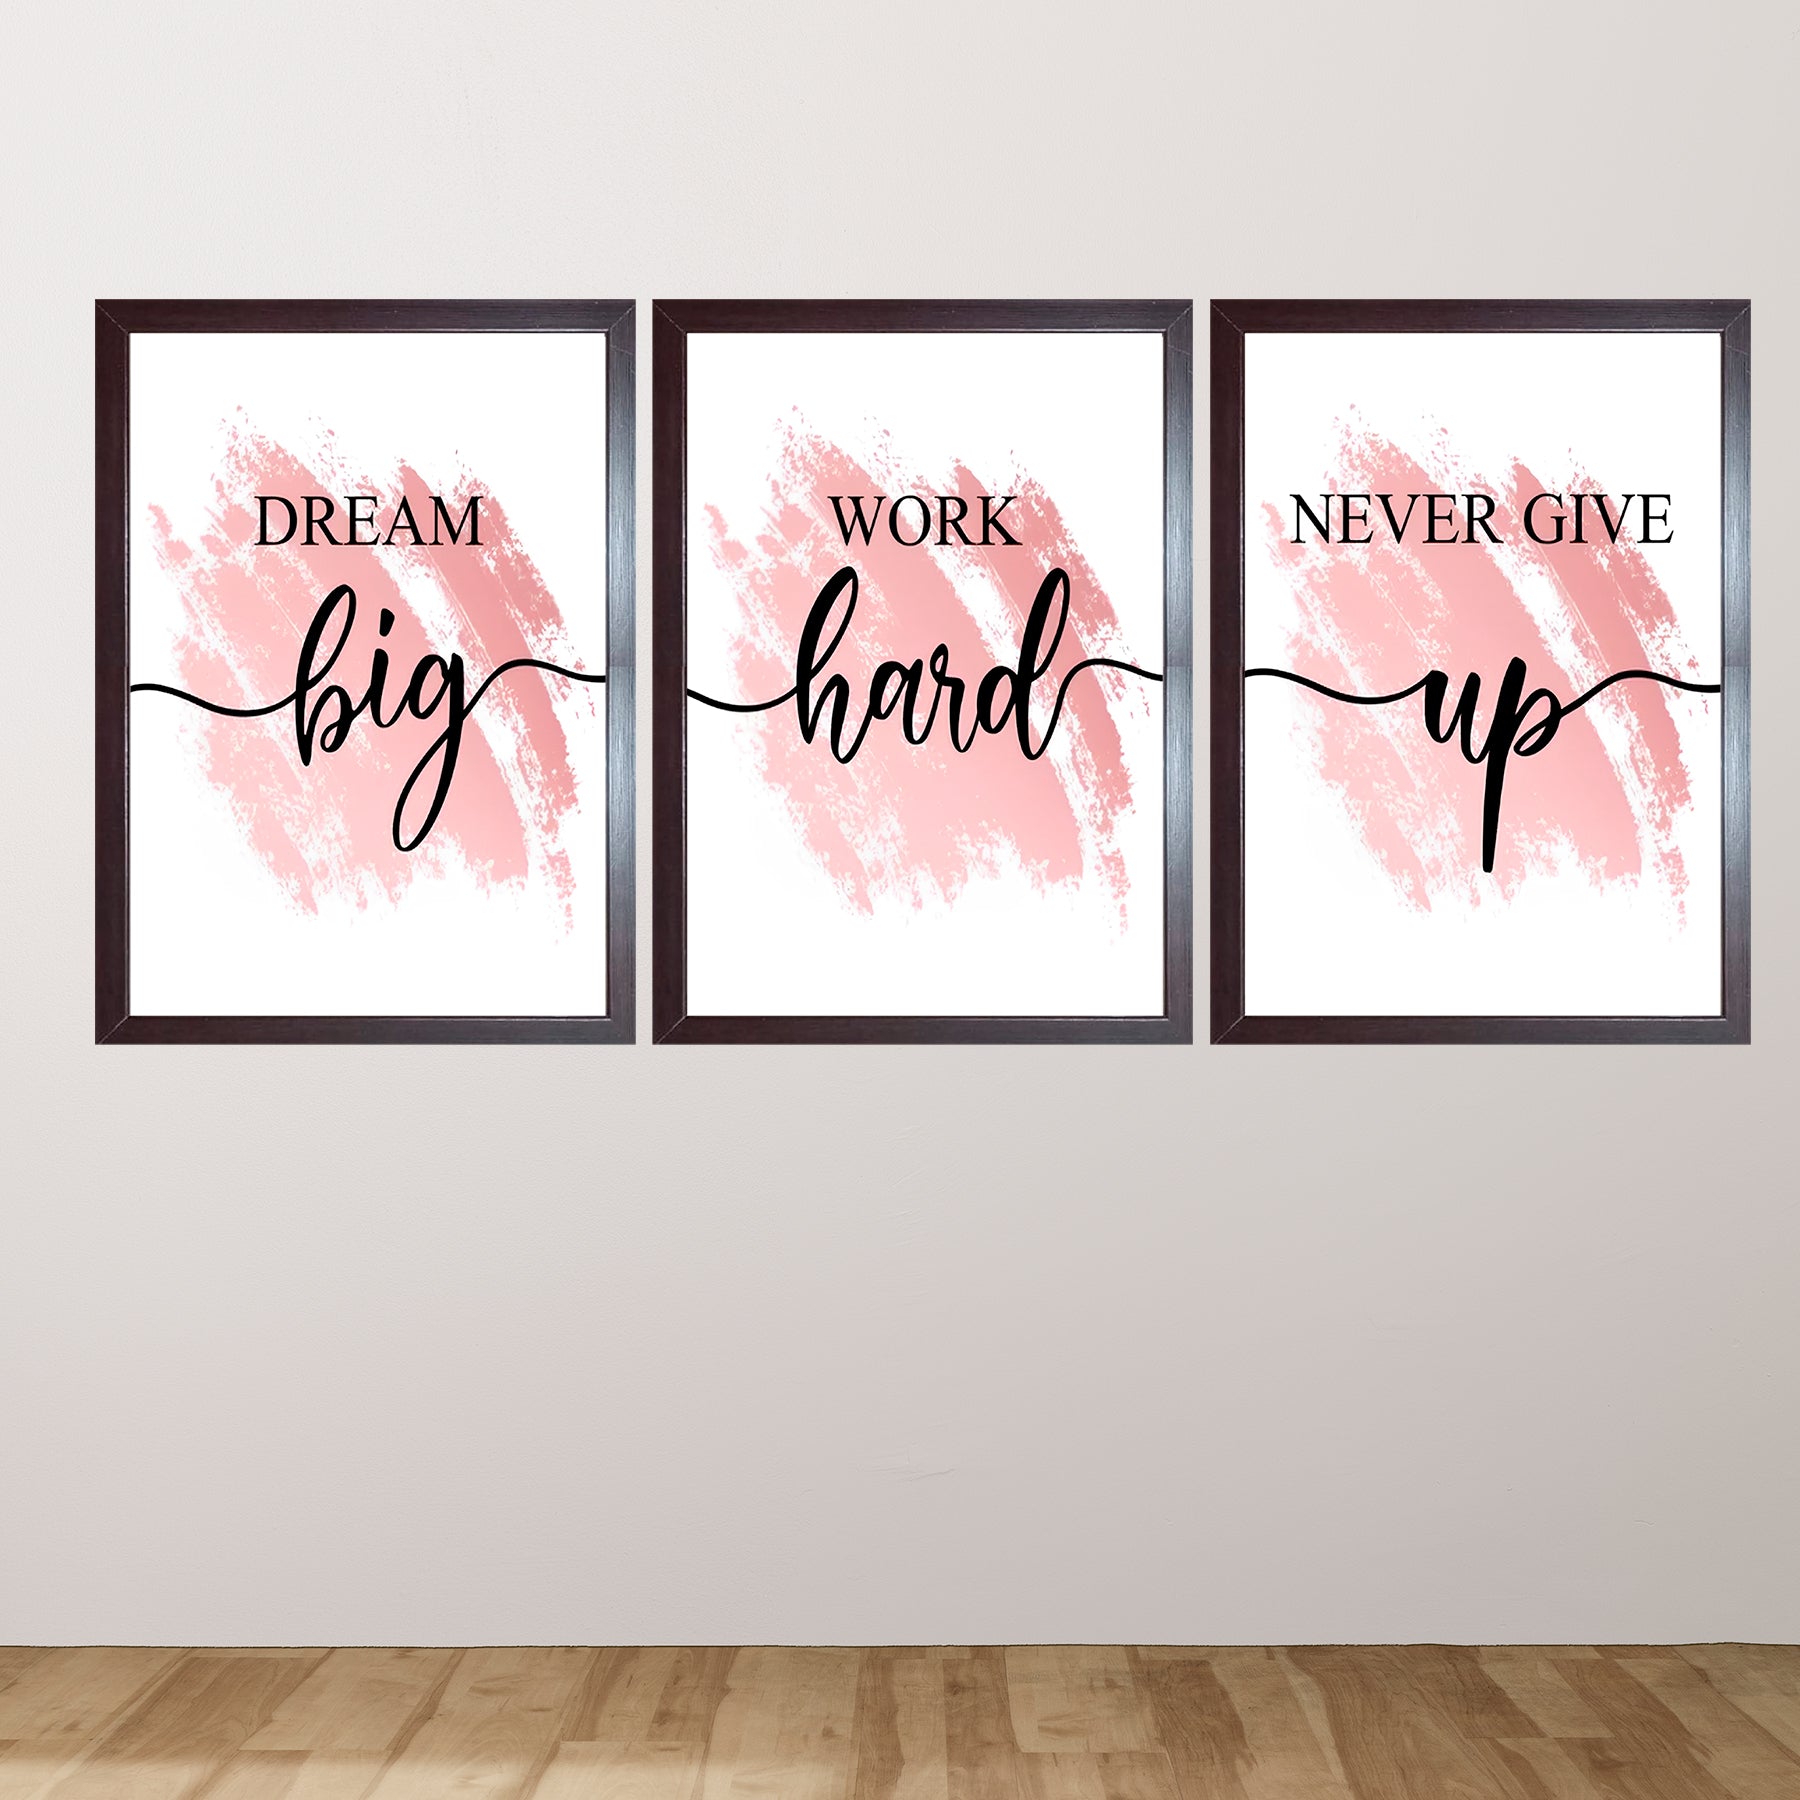 Motivational Quotes About Success For House & Office Decor Set of 3 Frames - 0